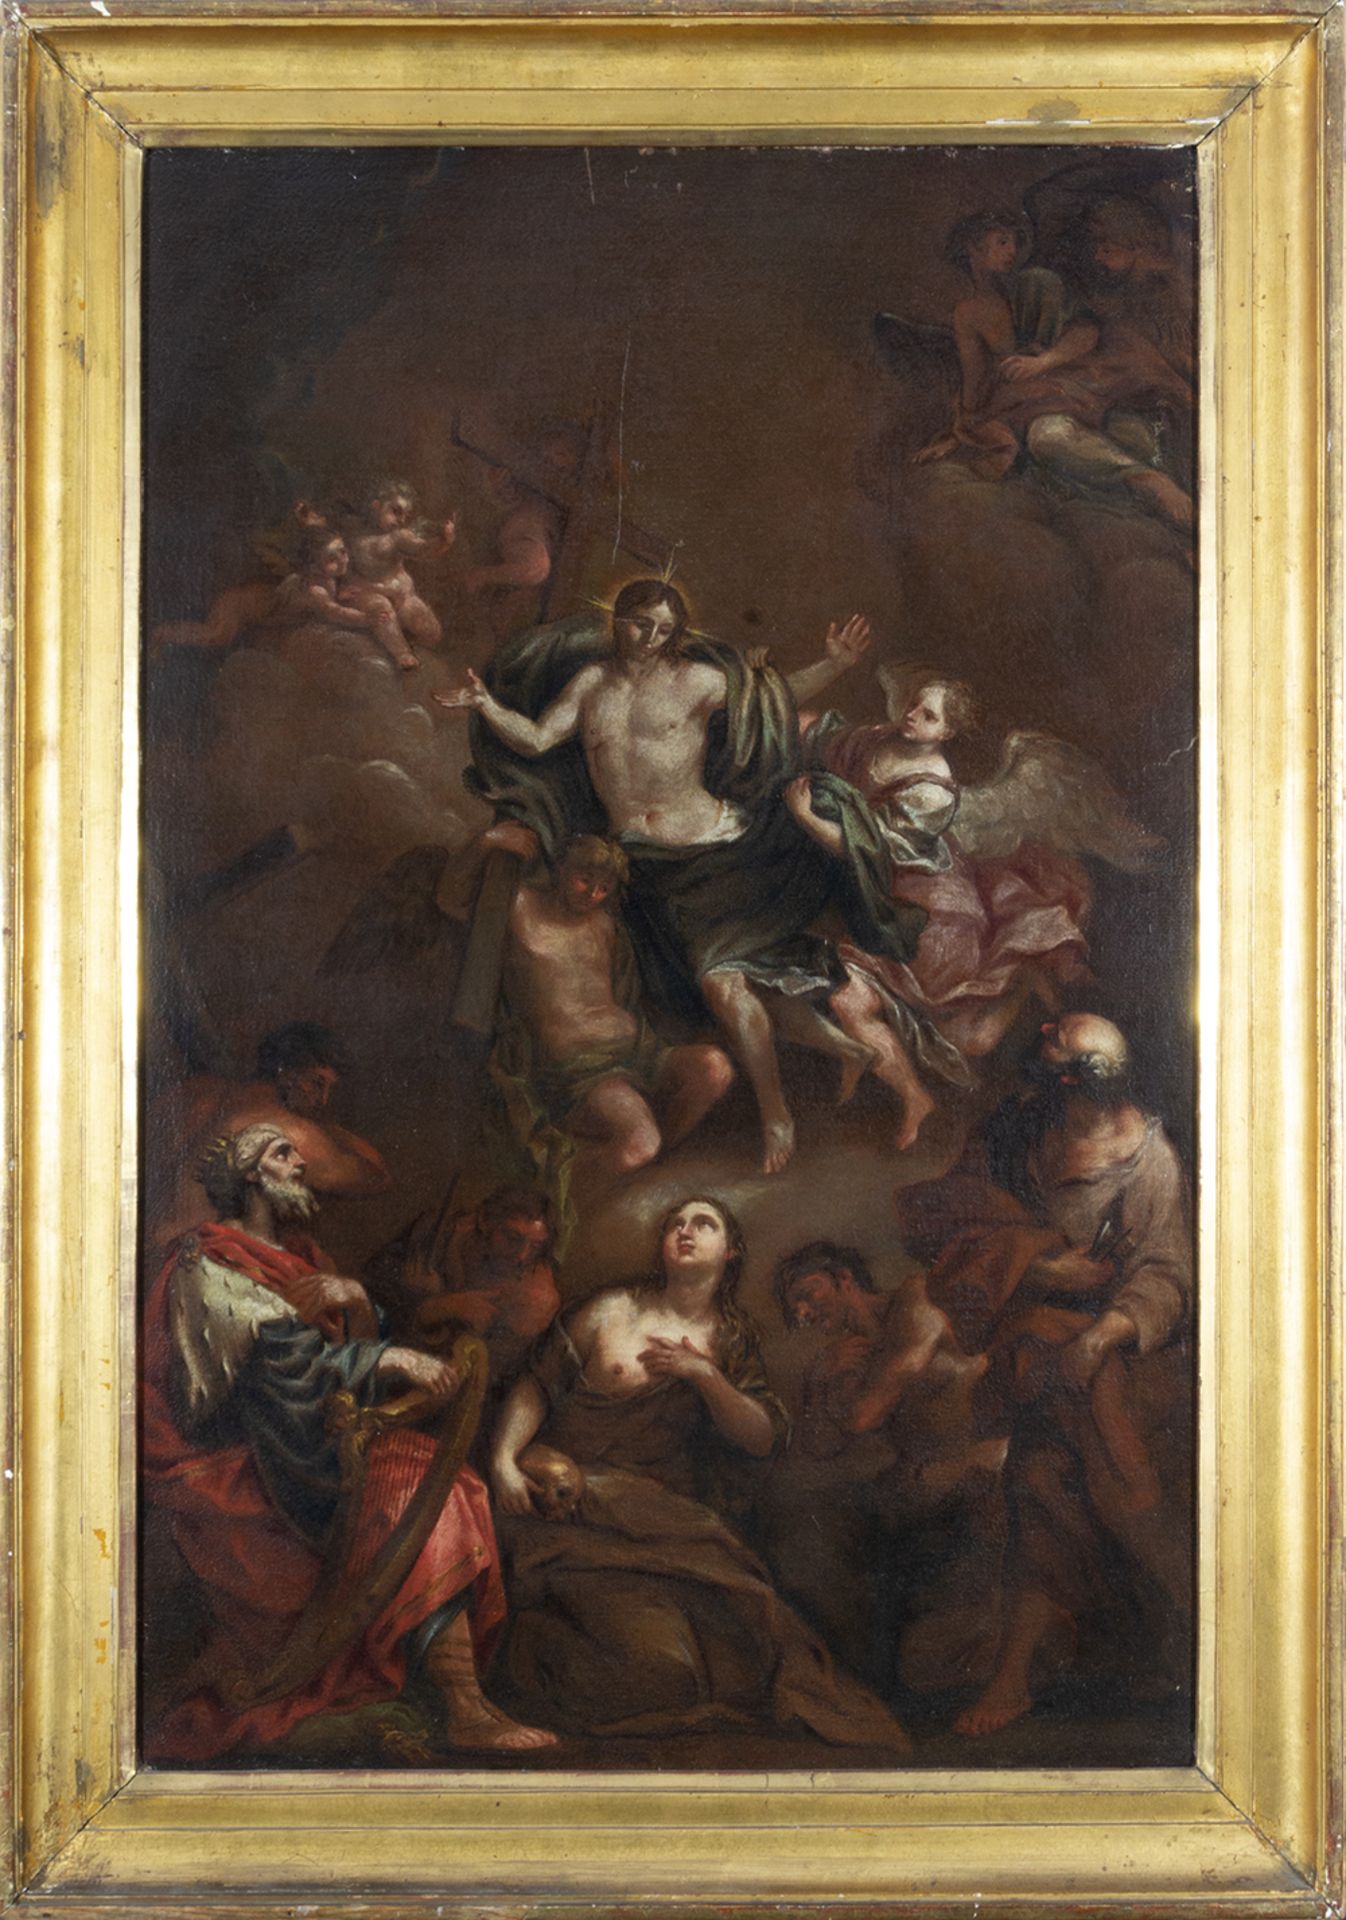 Italian school of the seventeenth century. The Ascension of the Lord